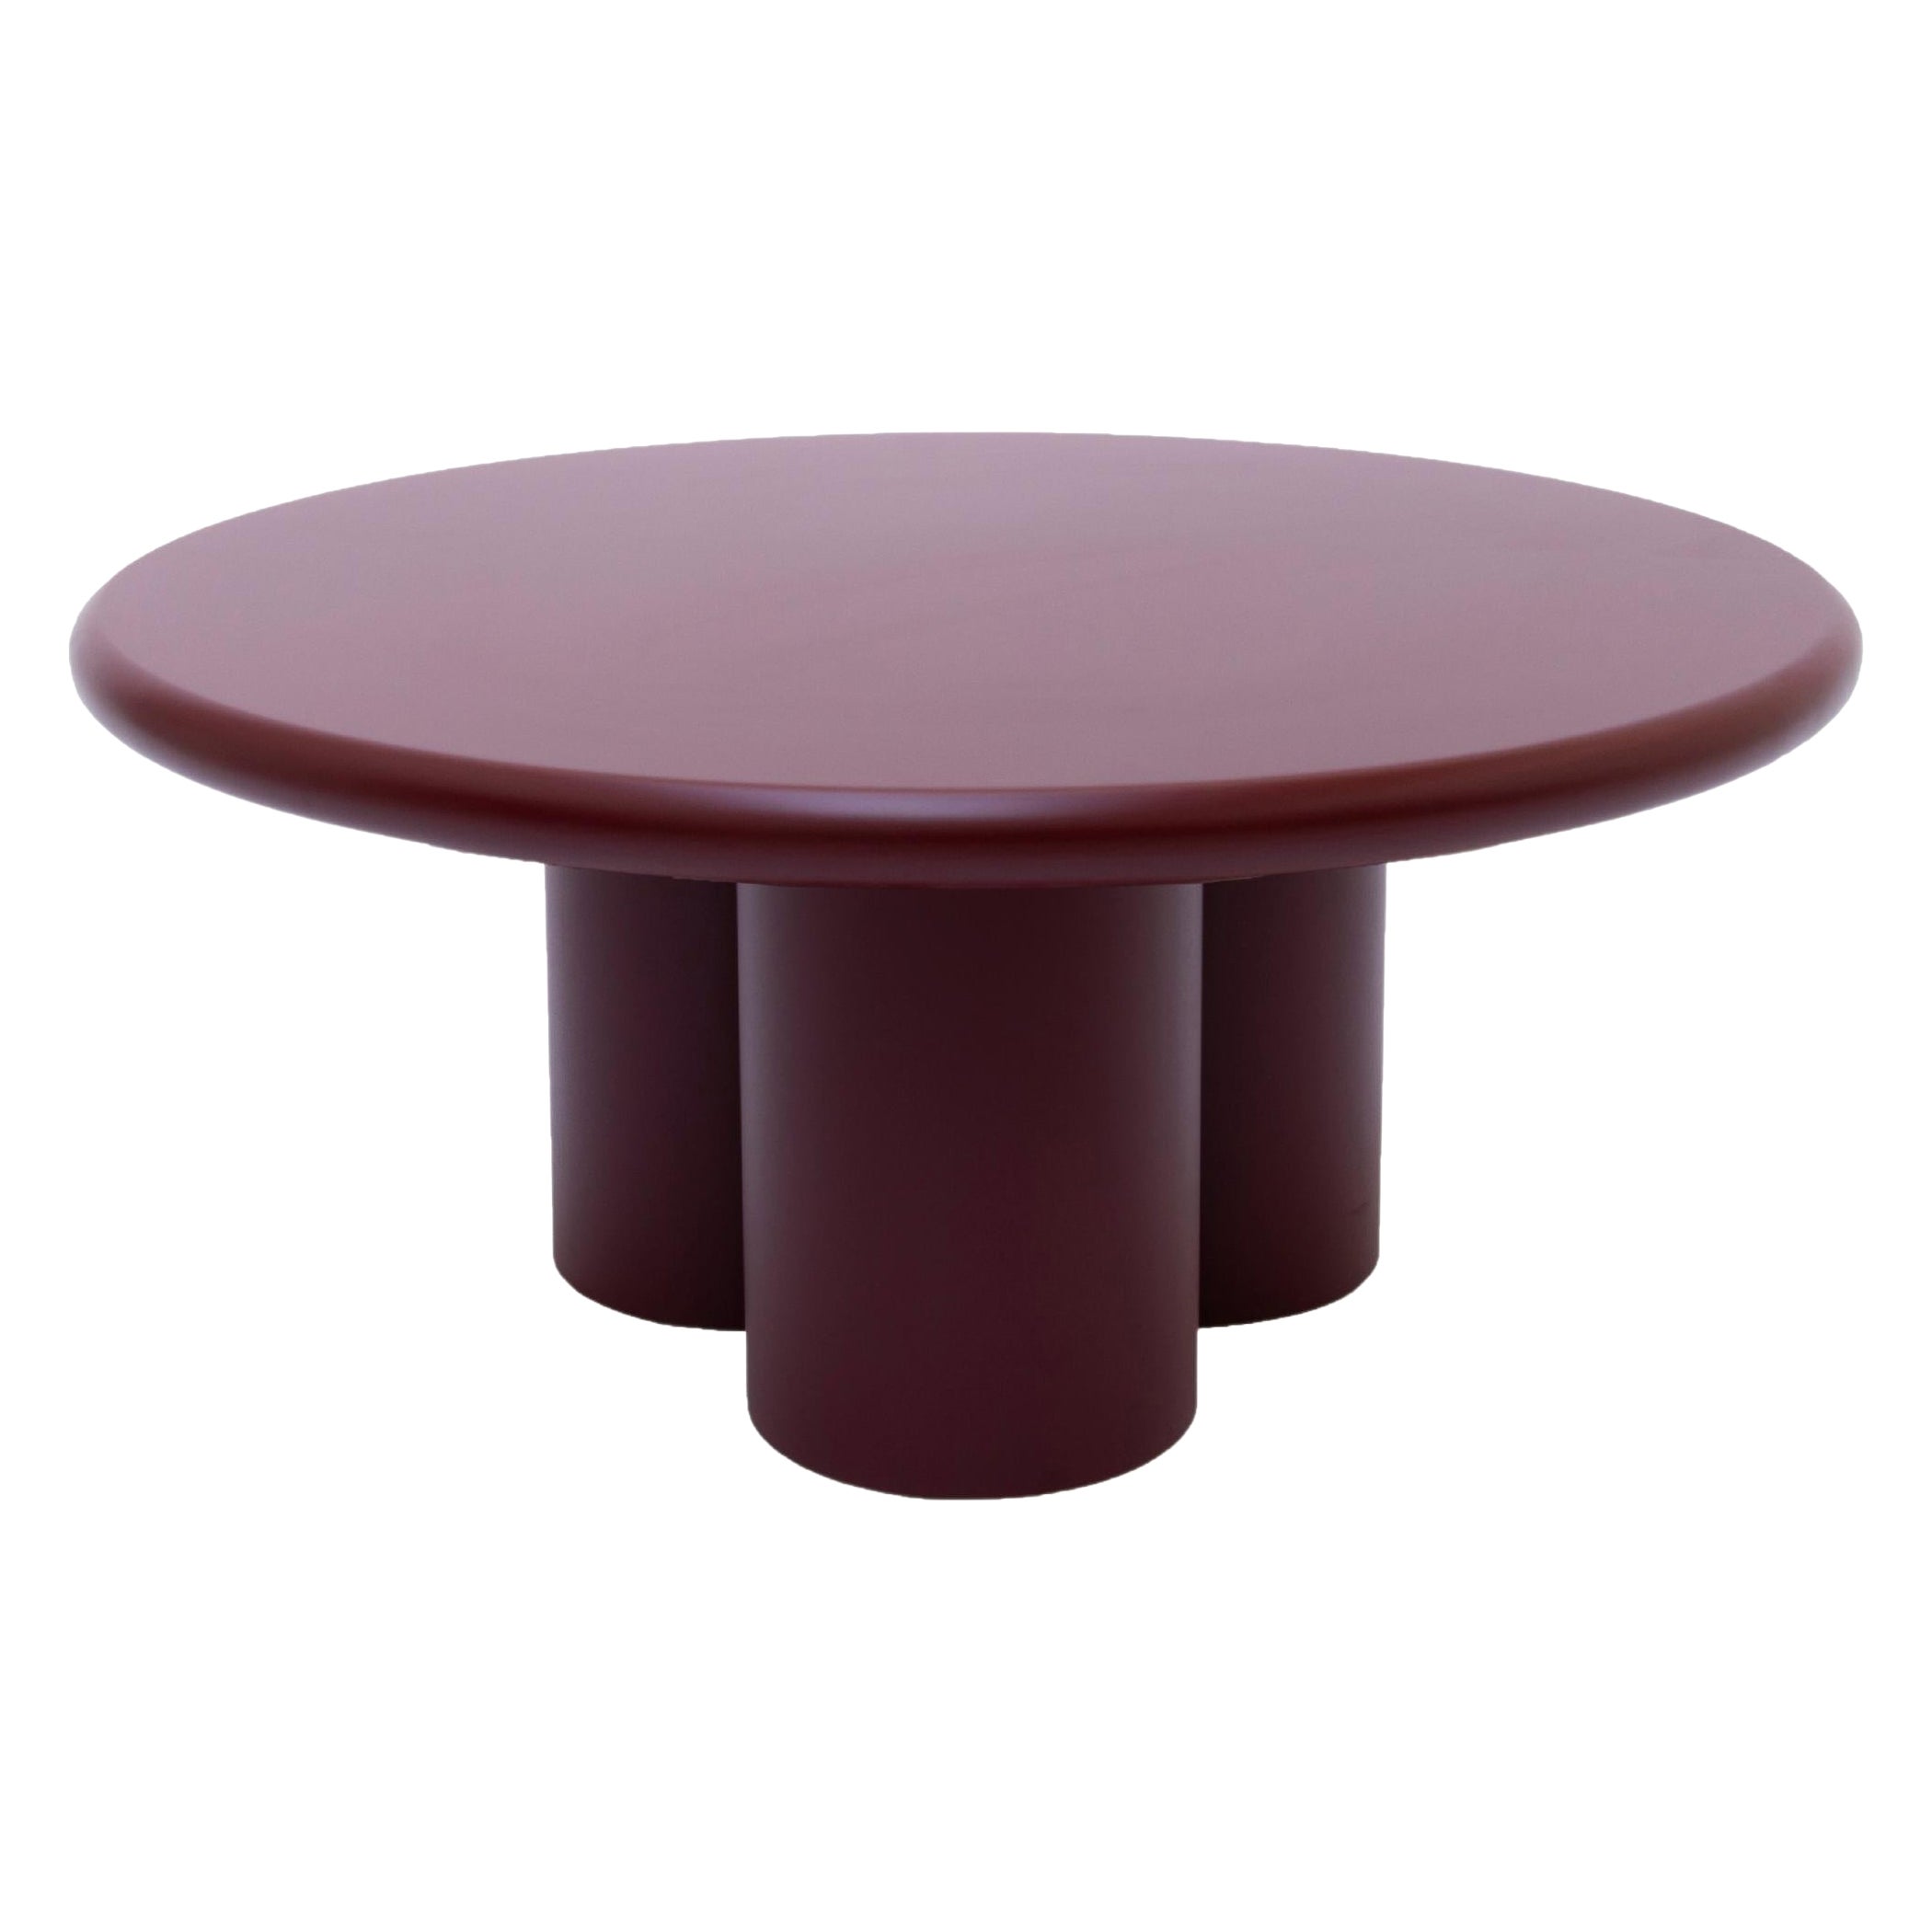 Object 059 Mdf Red 90 Coffee Table by NG Design